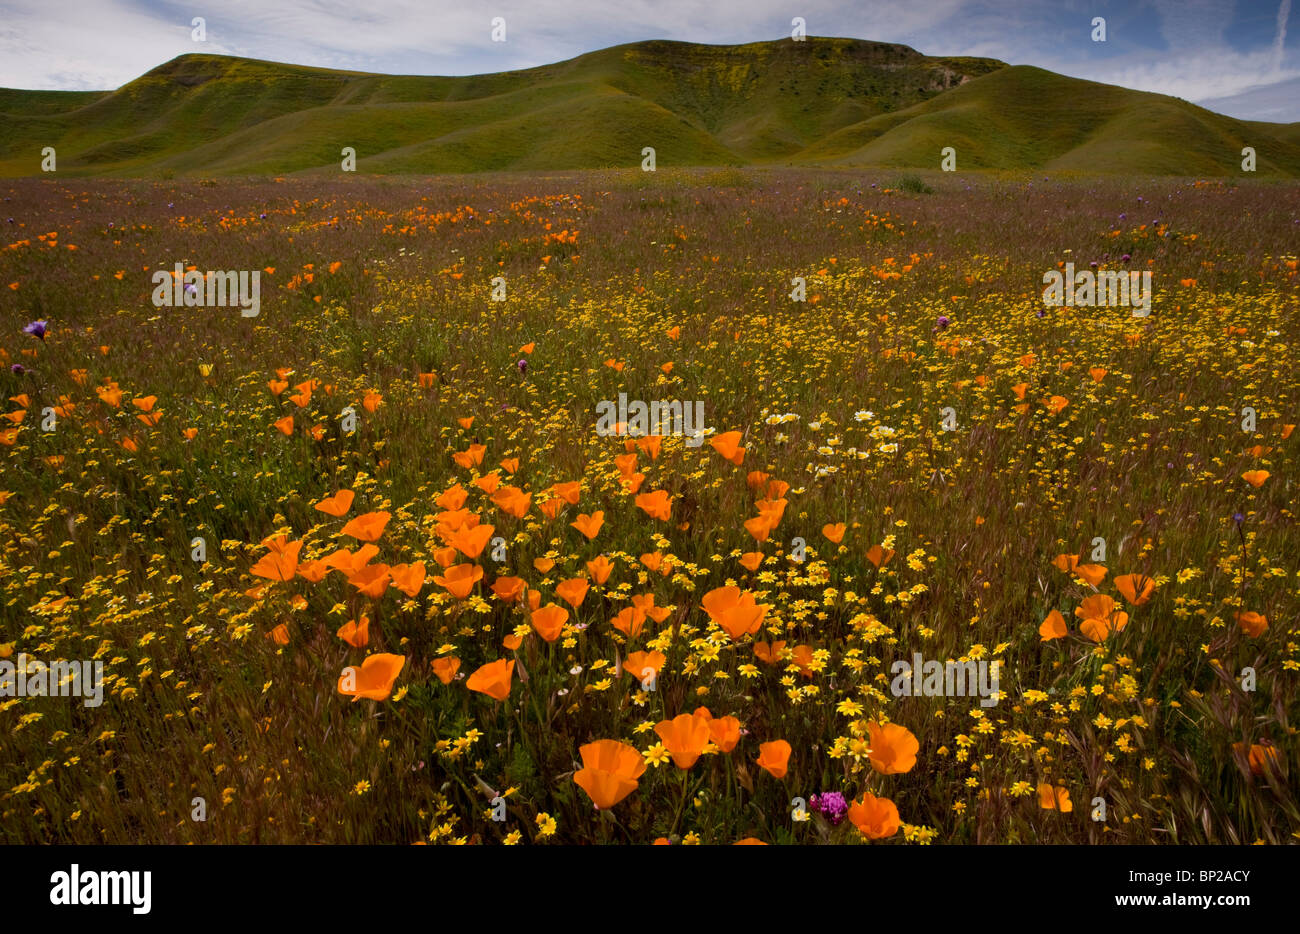 California Poppies, Goldfields and other spring flowers at Shell Creek near San Luis Obispo, S. California. Stock Photo